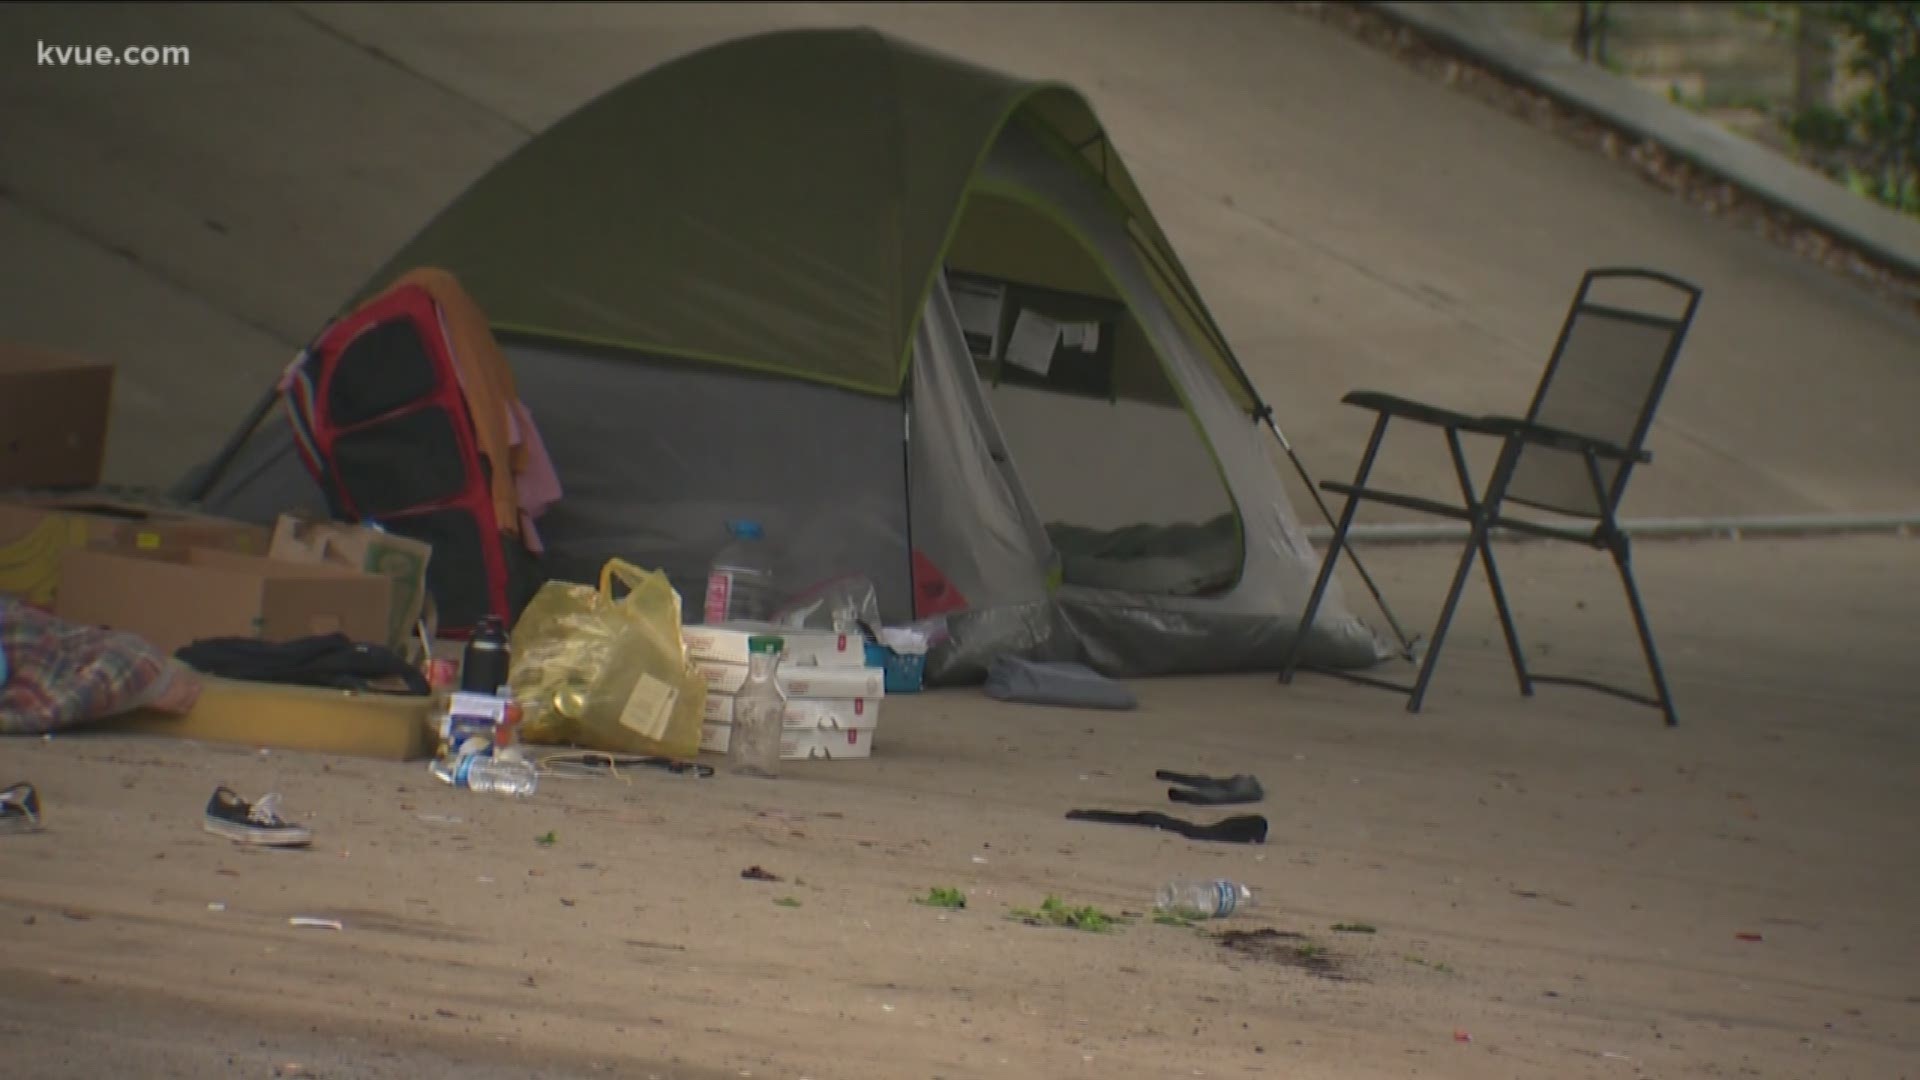 The City recently released a five-page memo detailing the work it's doing to take care of the homeless population.